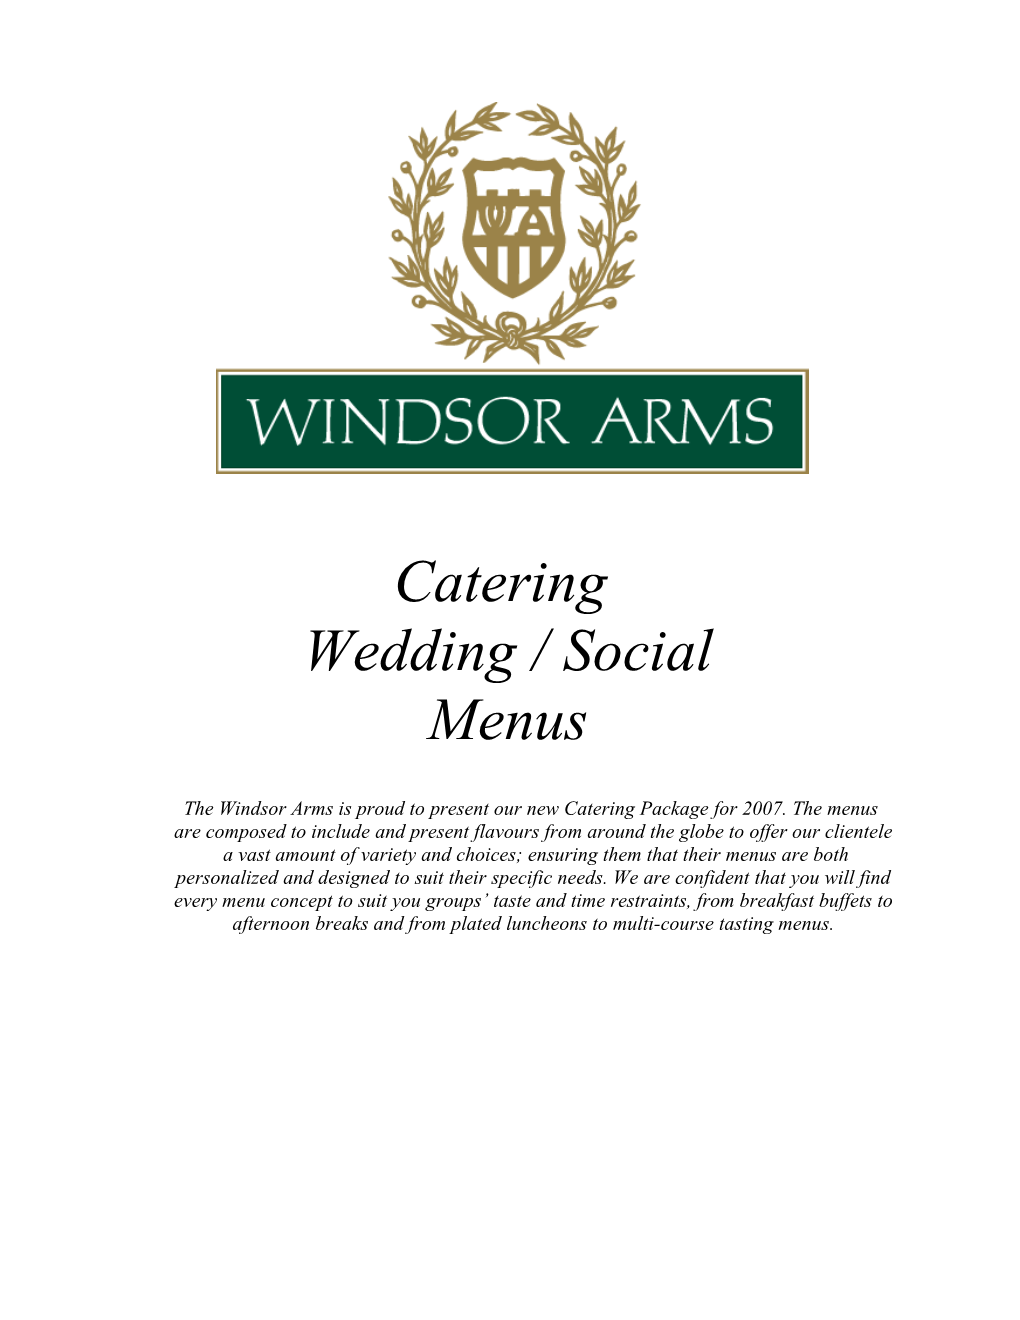 The Windsor Arms Is Proud to Present Our New Catering Package for 2007. the Menus